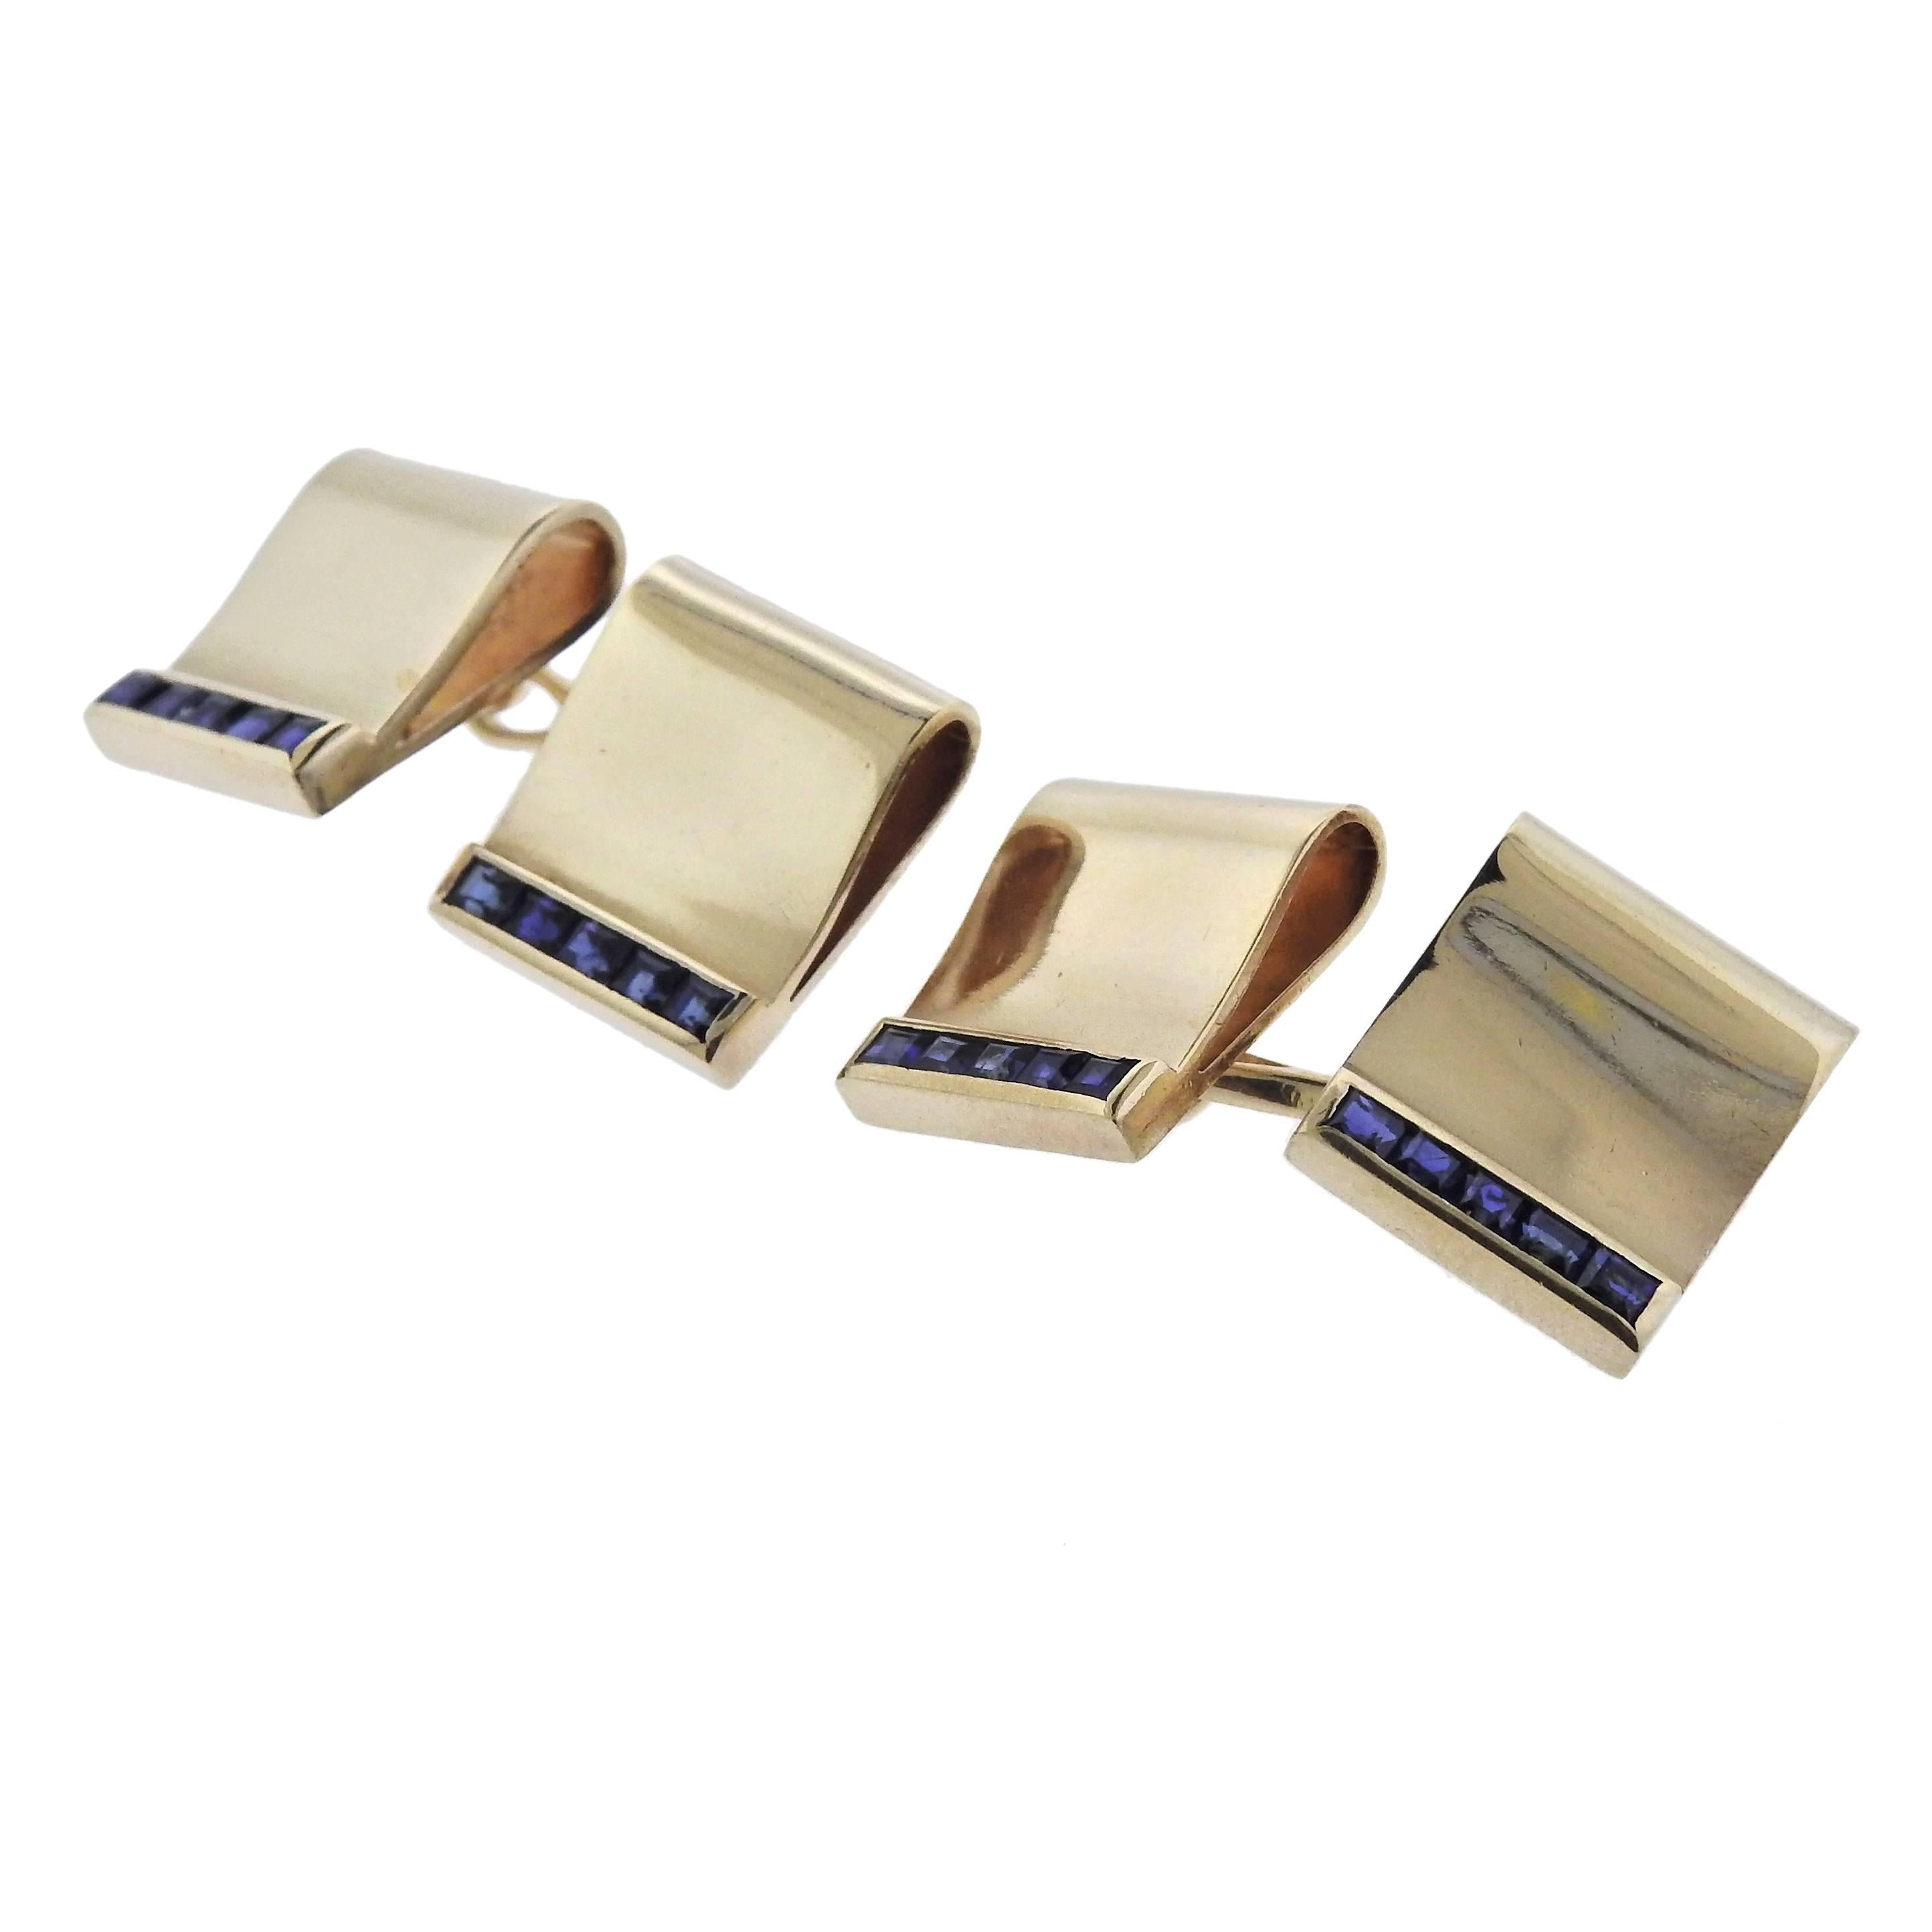 Pair of 14k gold Retro cufflinks, adorned with blue sapphires. Each top is 14mm x 12mm, weigh 13.9 grams. Marked: 14k.